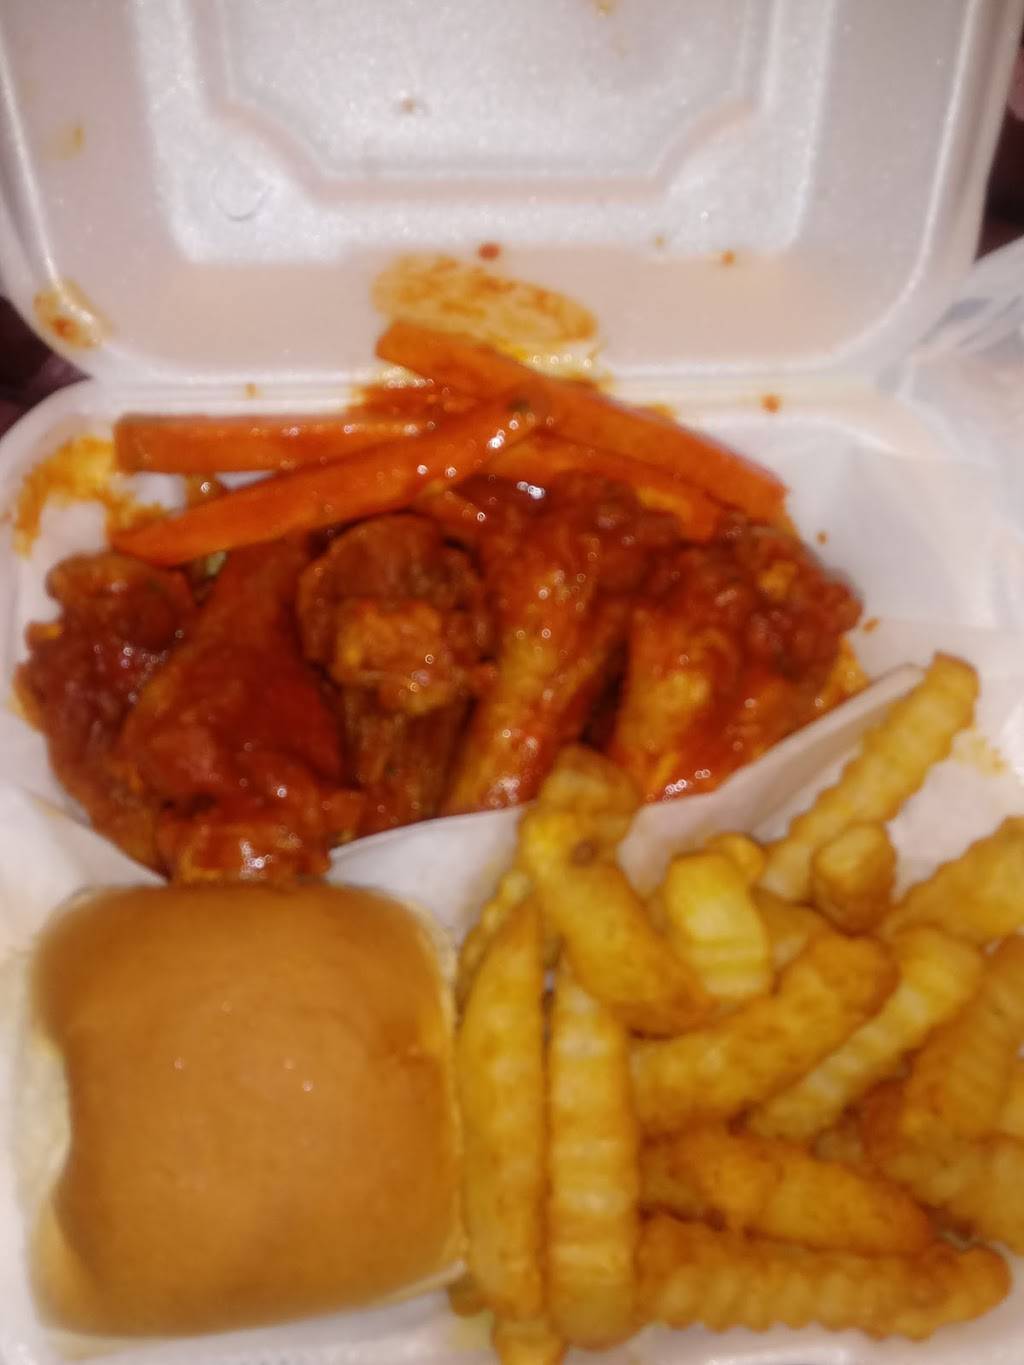 Crumpys Wings & More | meal takeaway | 4641 Mill Branch Rd, Memphis, TN 38116, USA | 9013963400 OR +1 901-396-3400